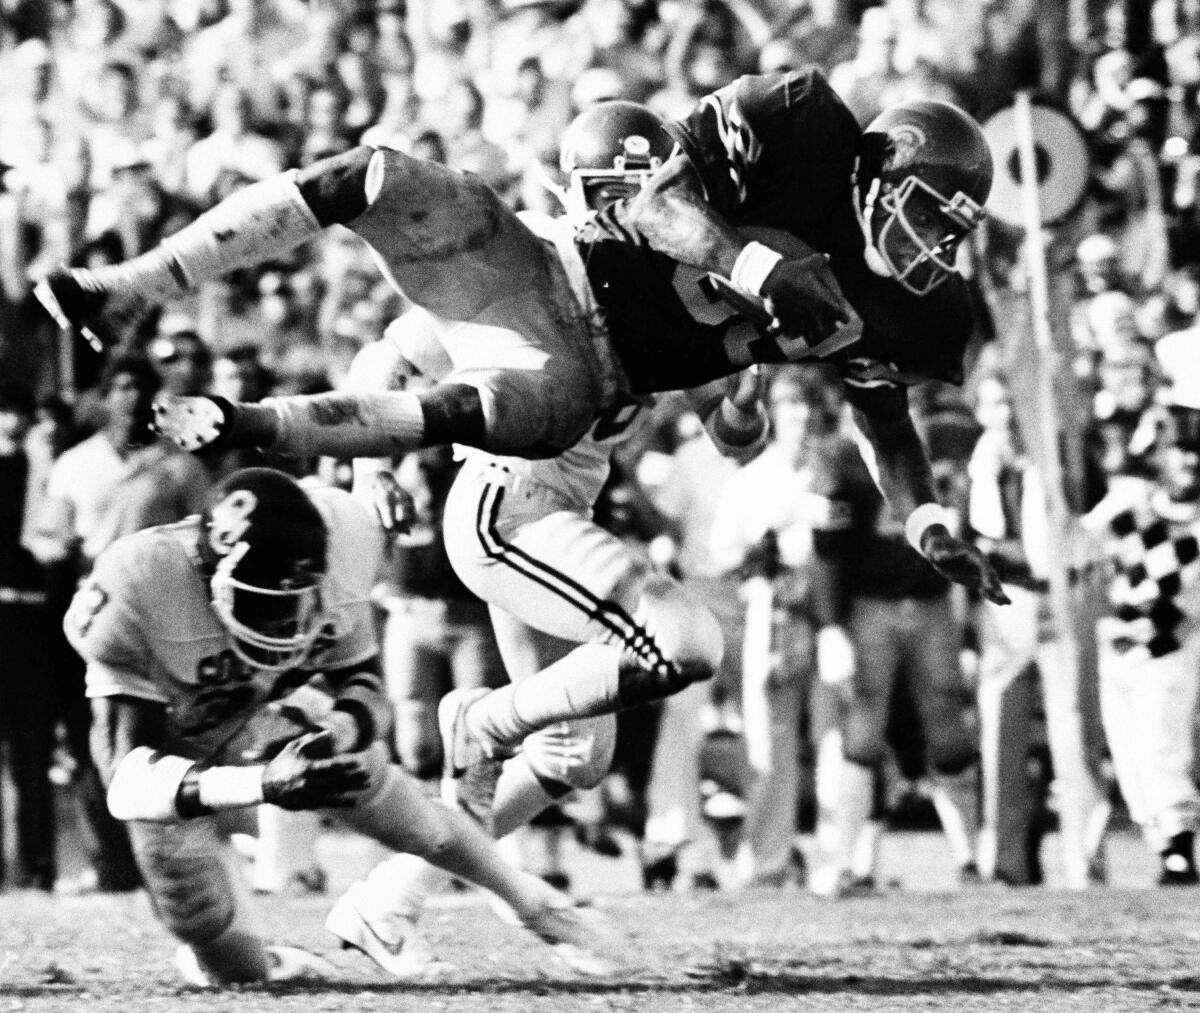 USC's Marcus Allen carries the ball against Oklahoma during a game in September 1981.